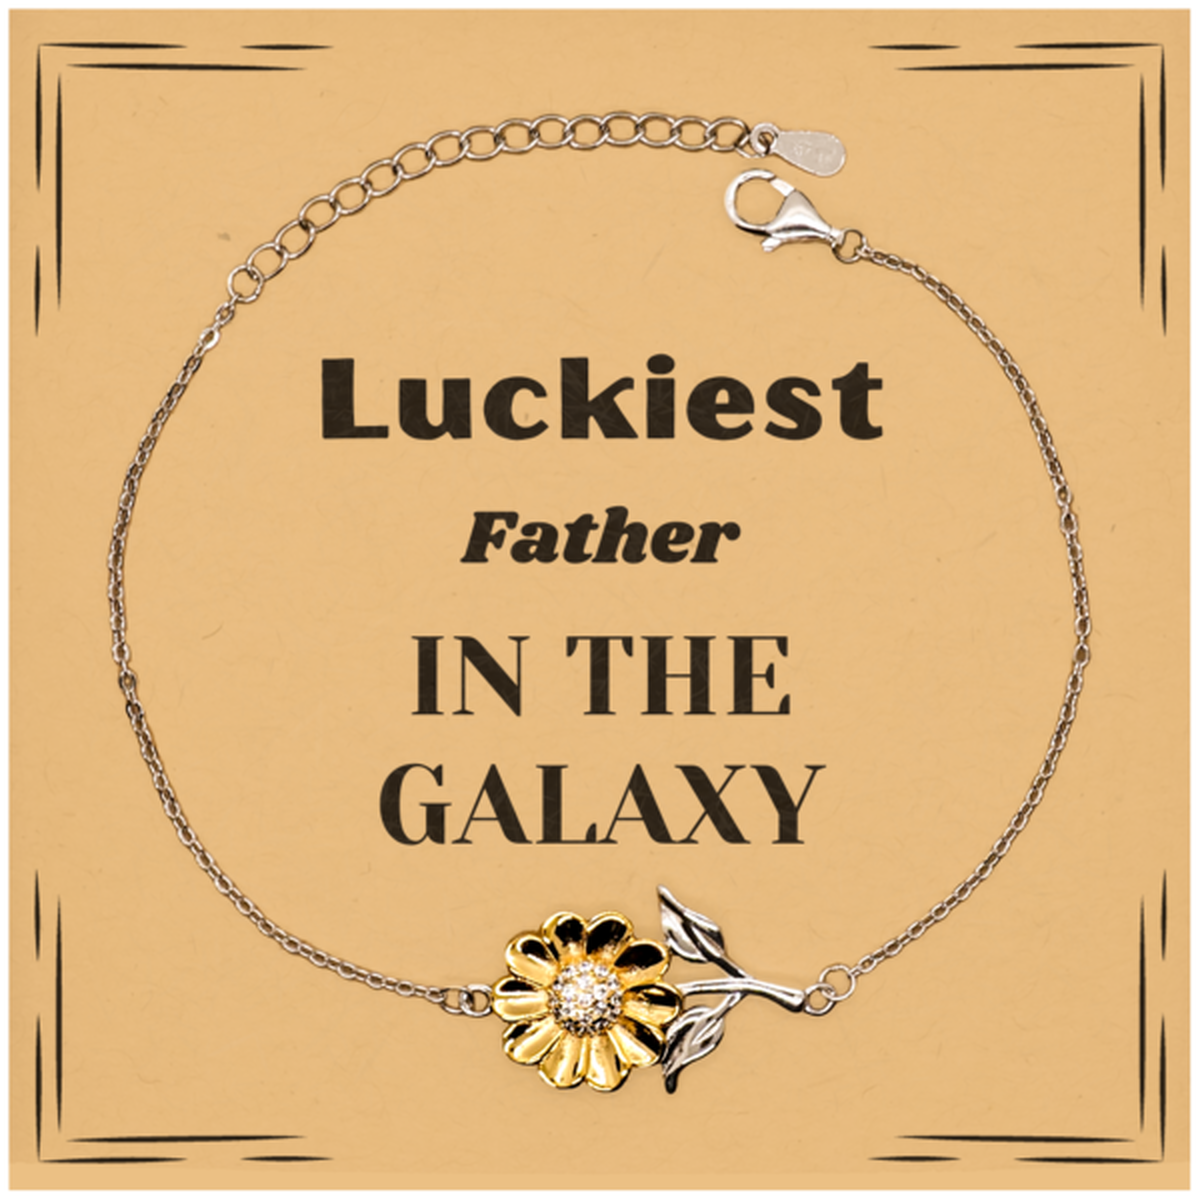 Luckiest Father in the Galaxy, To My Father Message Card Gifts, Christmas Father Sunflower Bracelet Gifts, X-mas Birthday Unique Gifts For Father Men Women